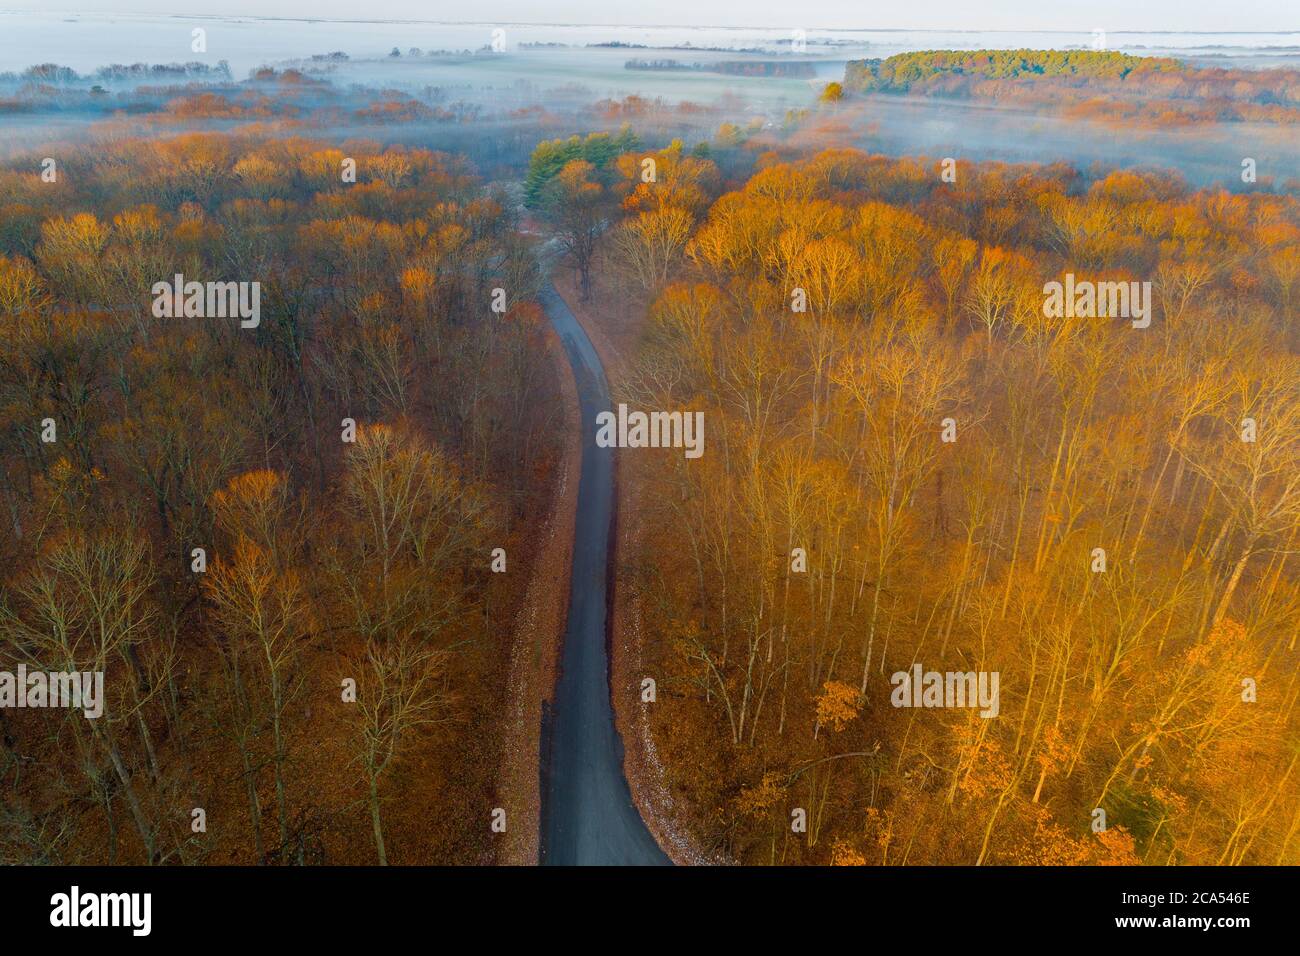 Aerial view of road in forest, Stephen A. Forbes State Park, Marion Co., Illinois, USA Stock Photo